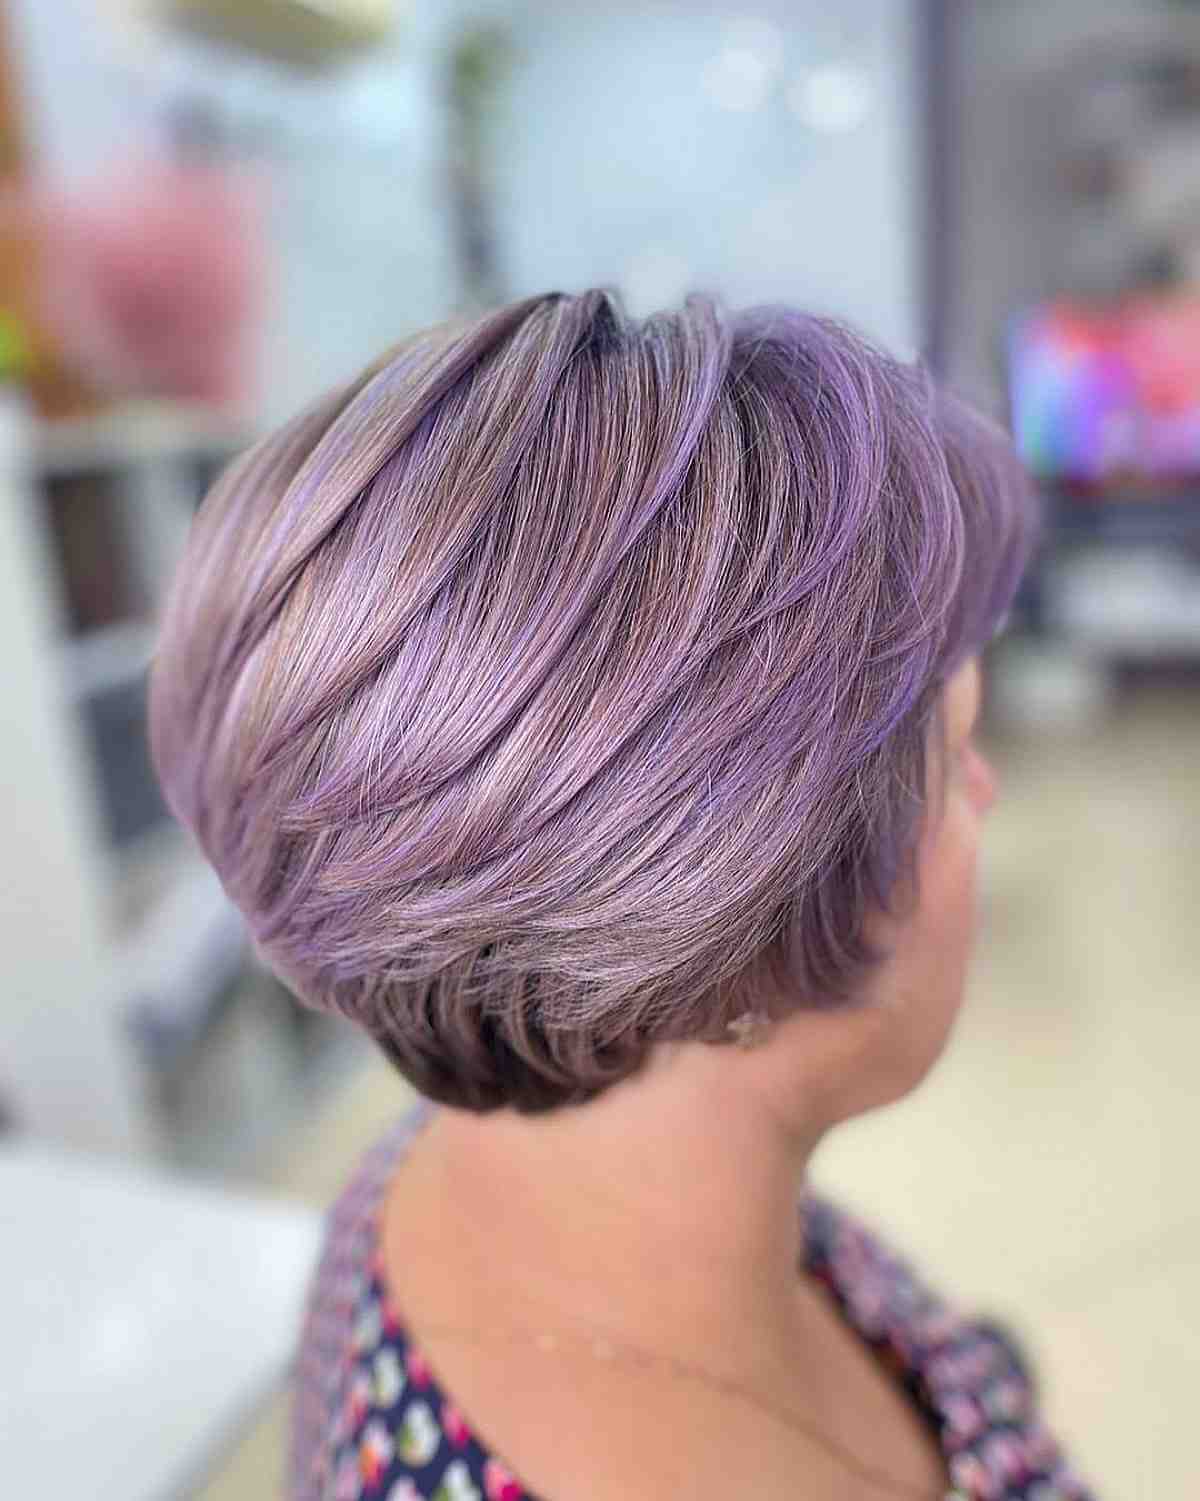 Short Wedge Cut with Lavender Highlights and Layers